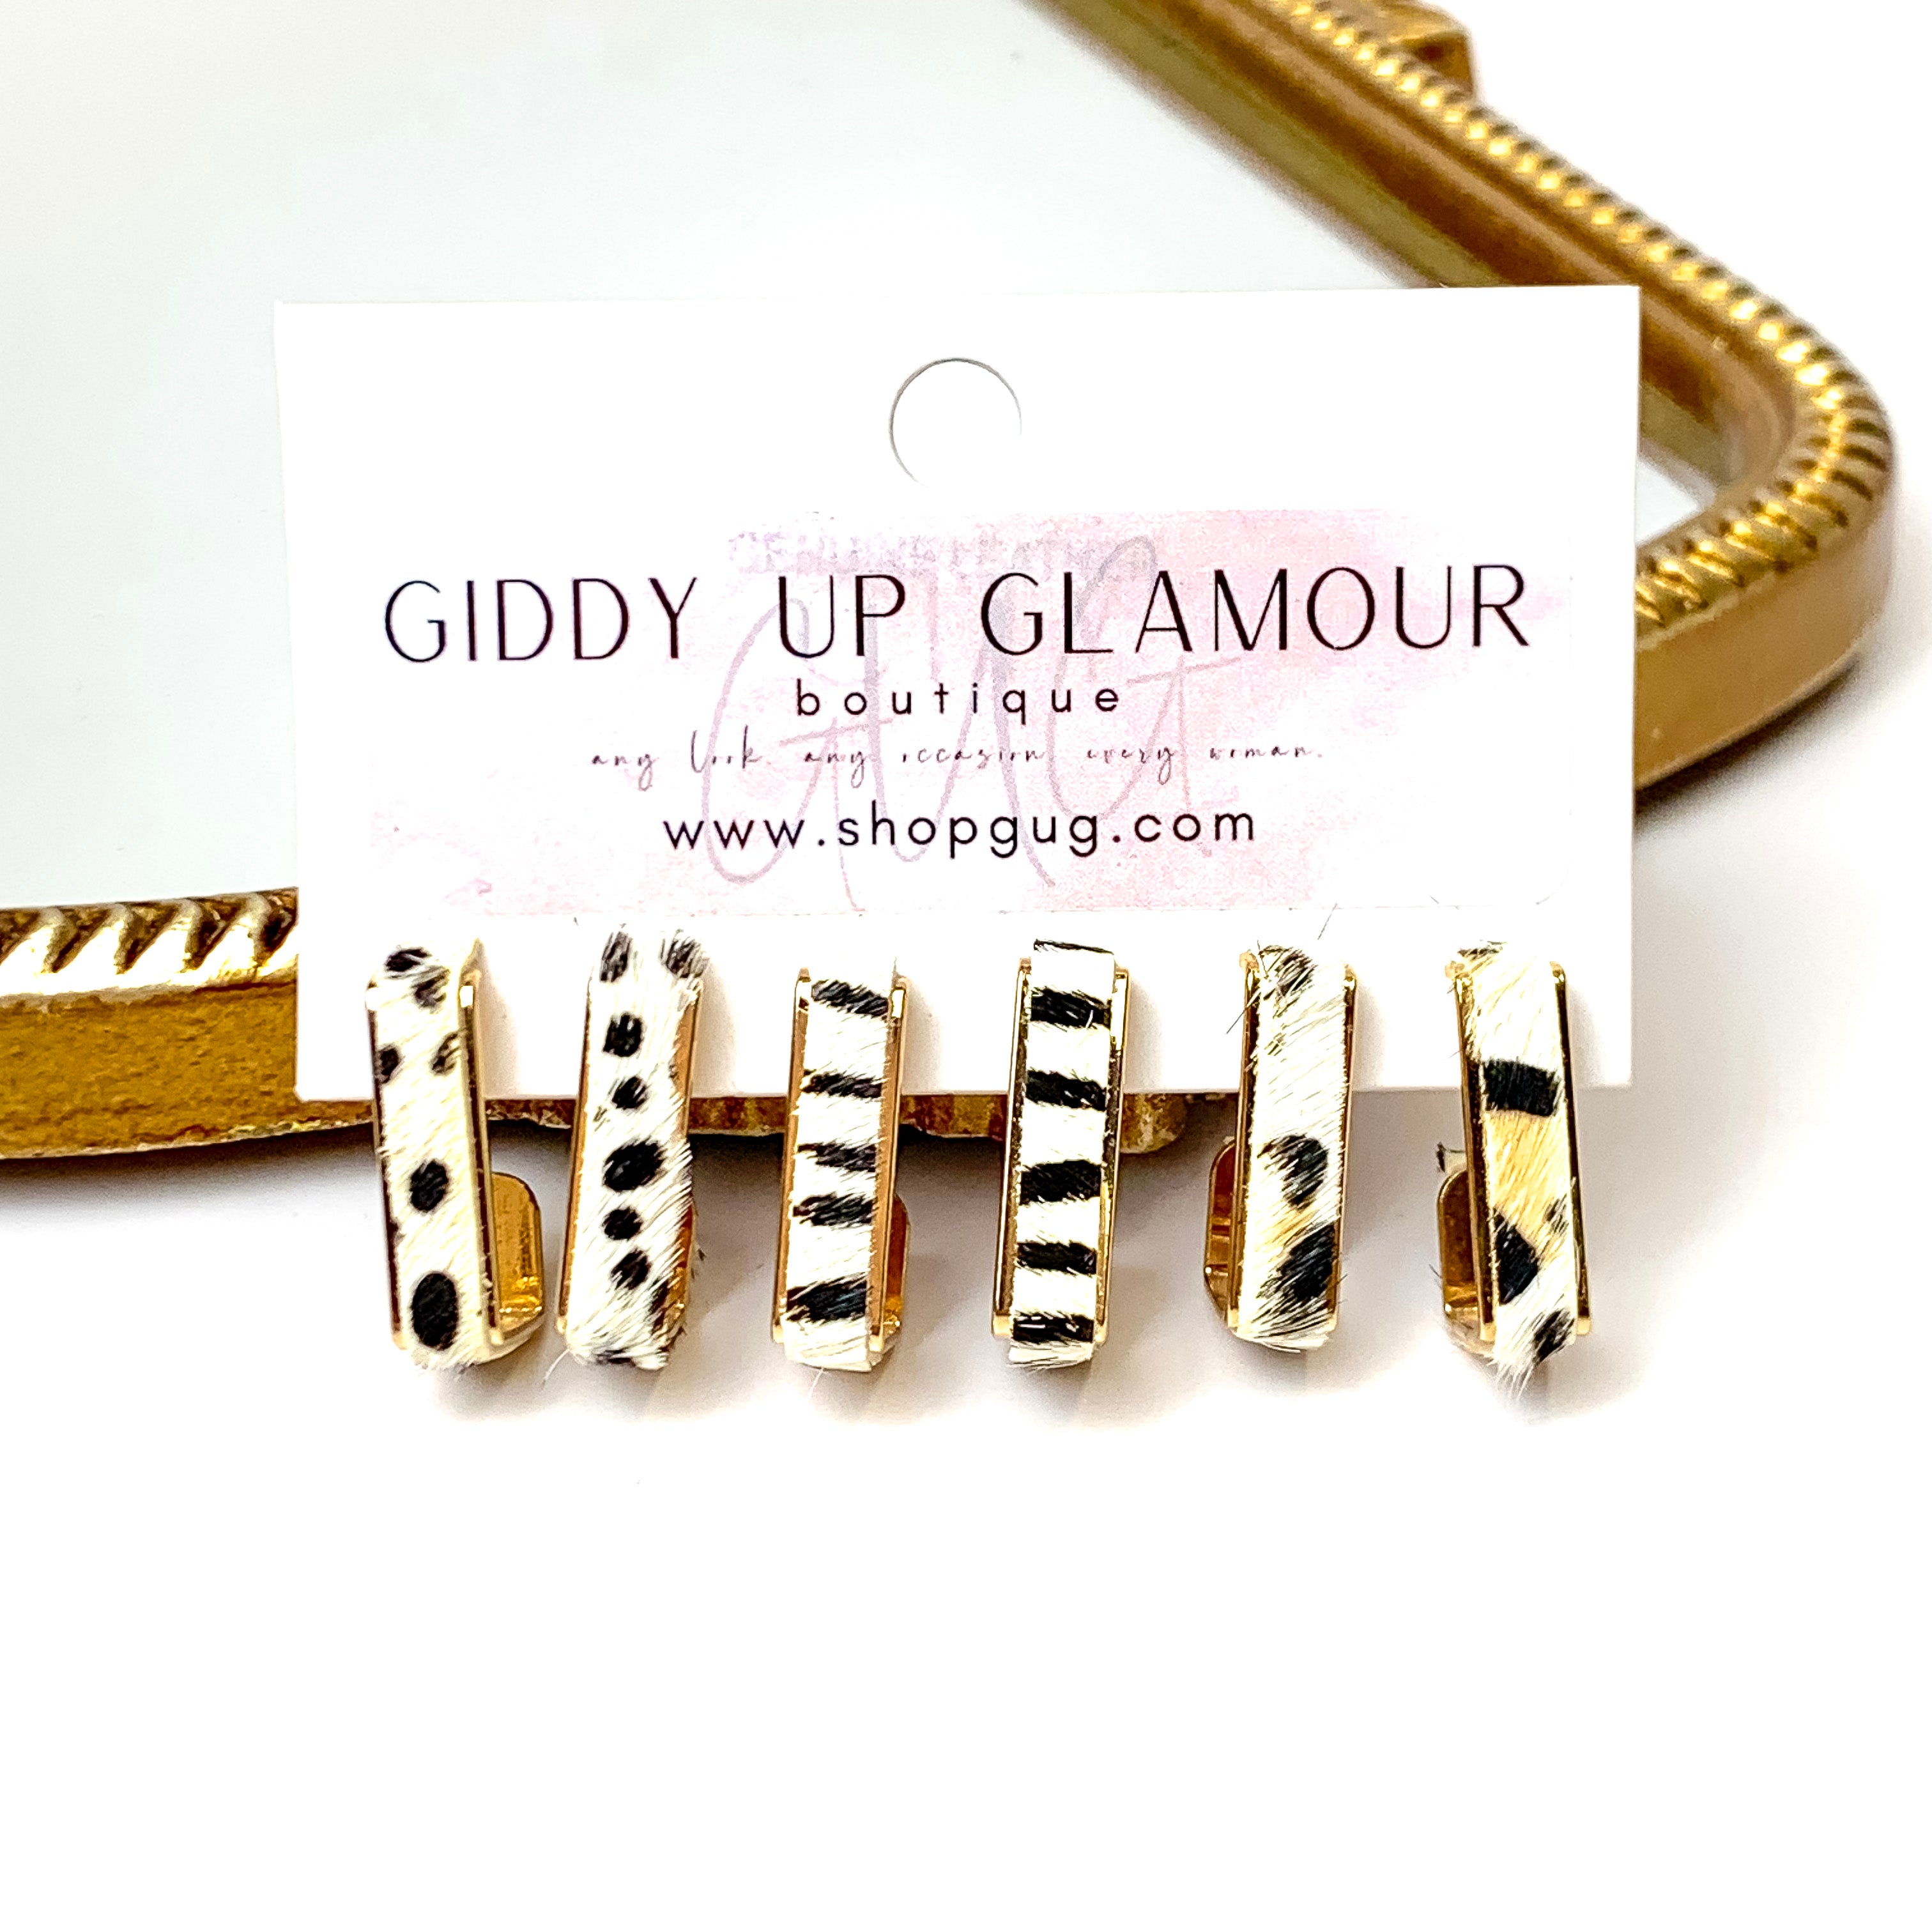 Wild Safari Set of Three Hoop Earrings in Ivory - Giddy Up Glamour Boutique